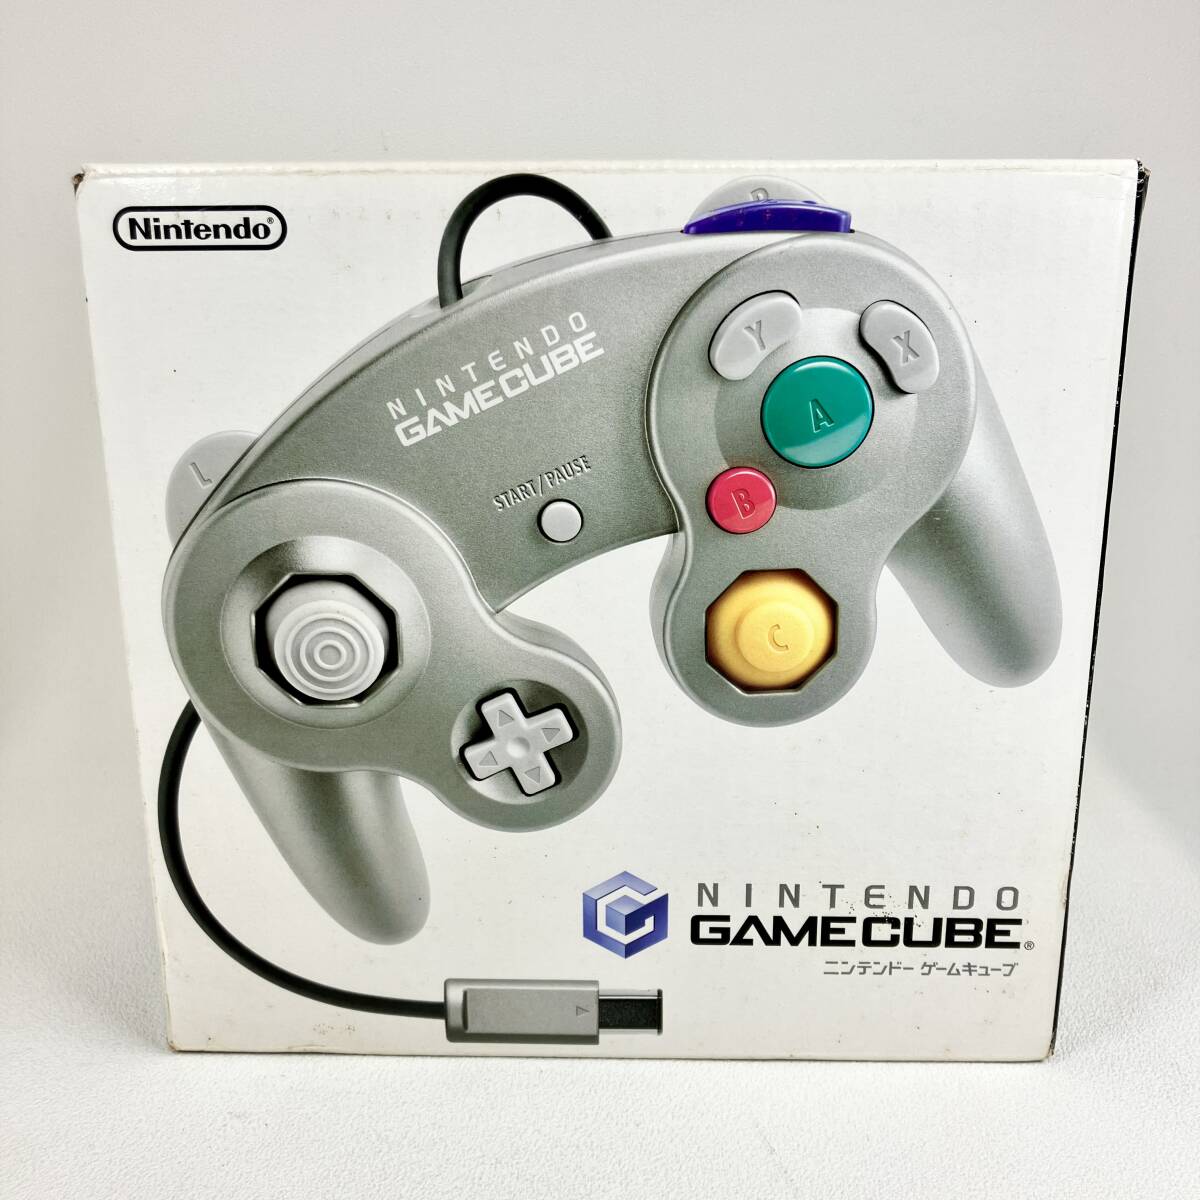 1 jpy ~ [GC]Nintendo nintendo Game Cube box attaching body DOL-S-PLA DOL-003 SHVC-008 owner manual operation verification settled game used present condition goods 